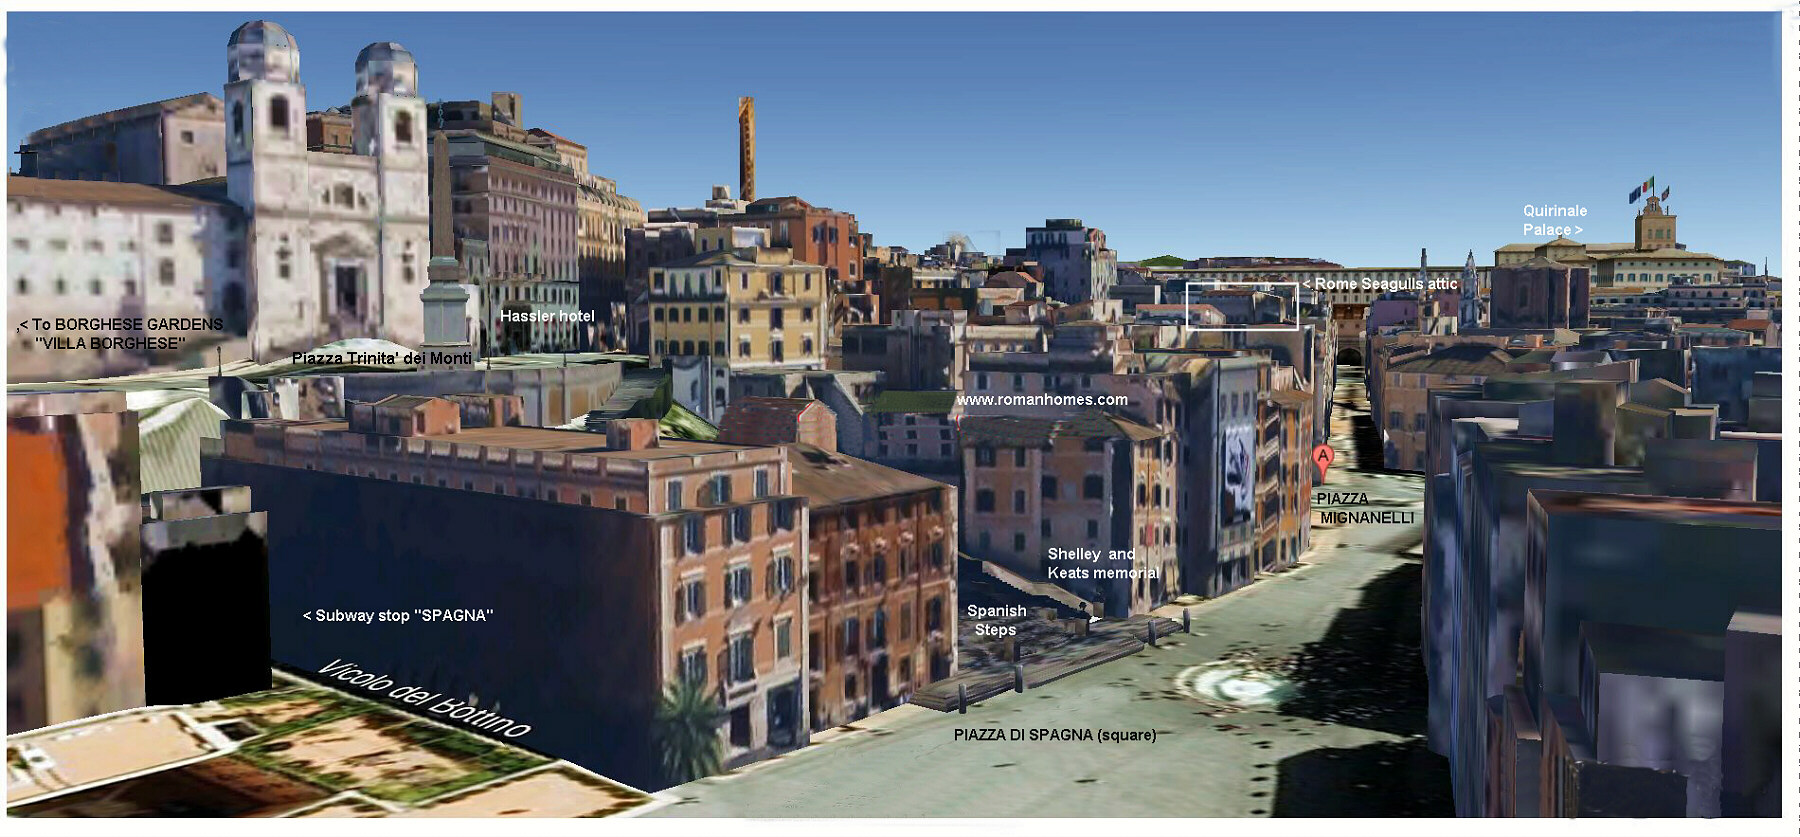 3D AREA MAP of the Spanish Steps Rome Seagull attic two bedrooms terrace with stunning views